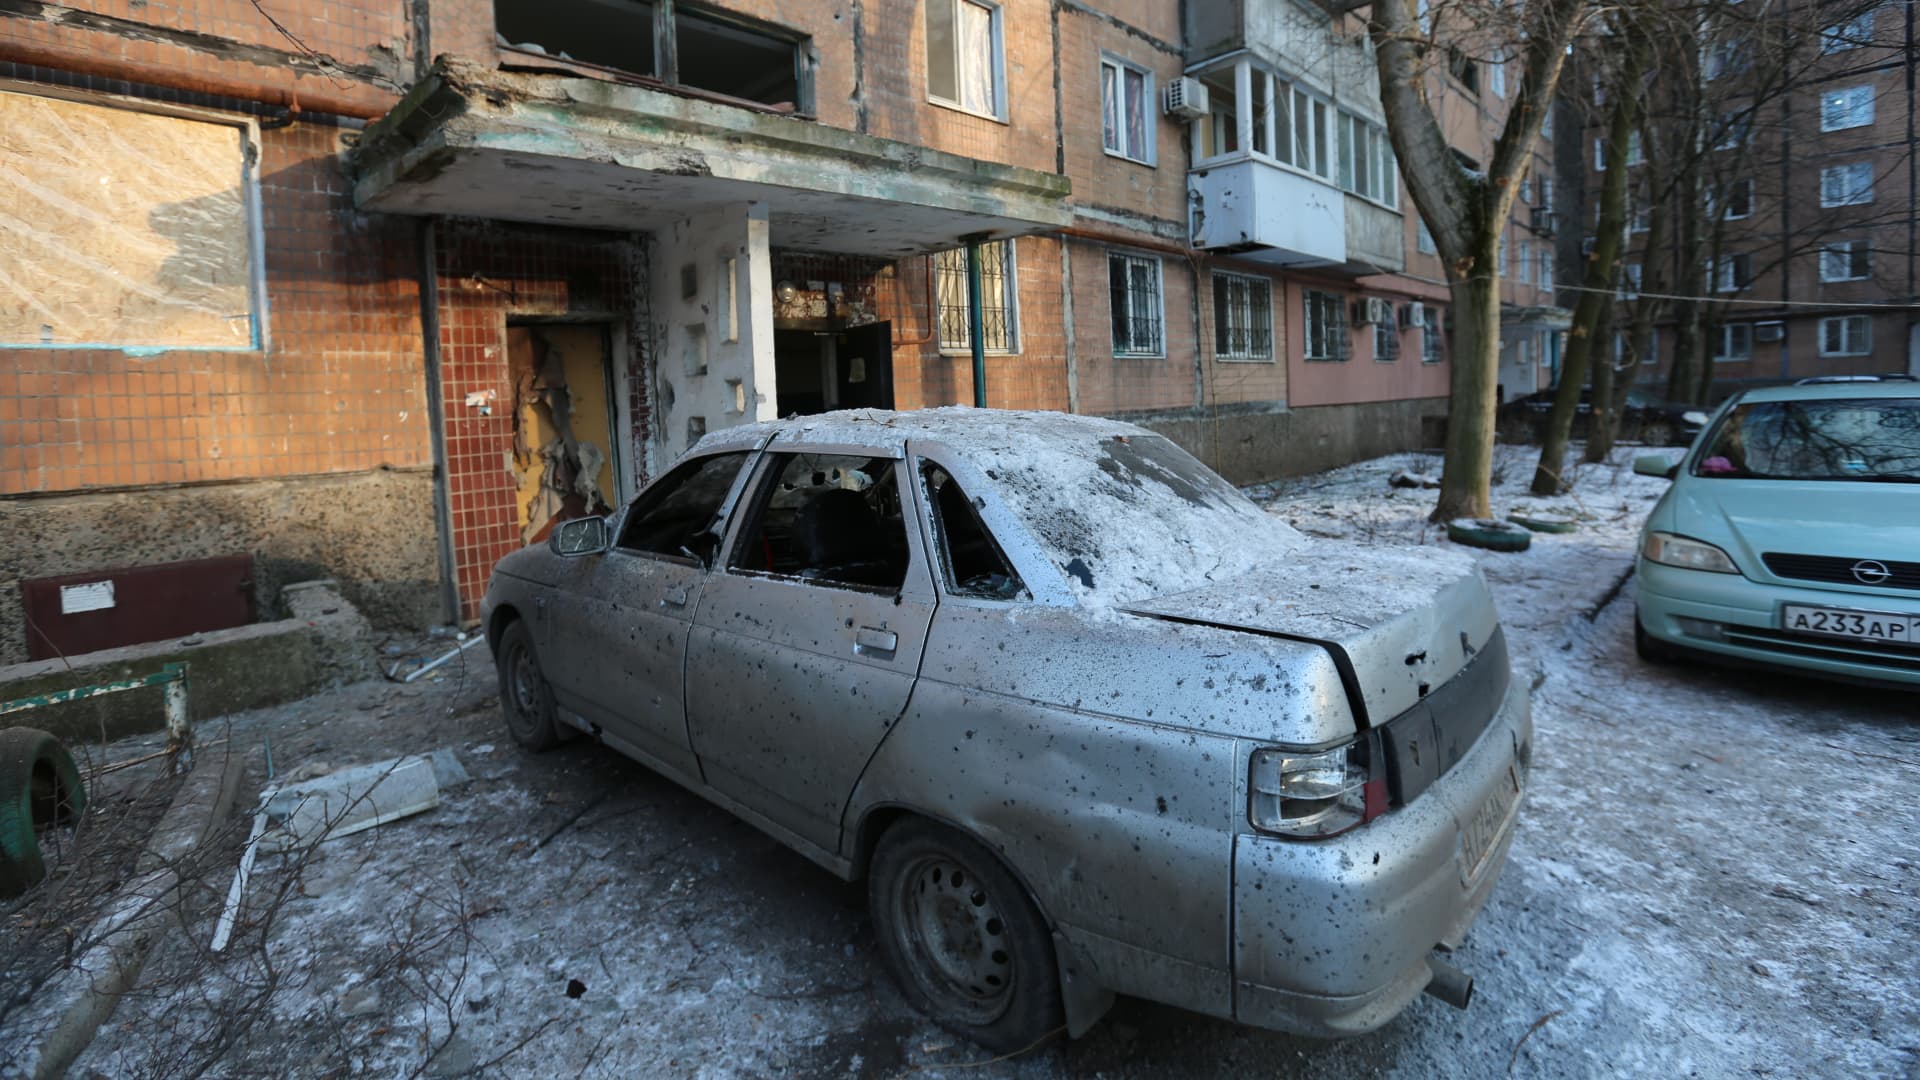 DONETSK, UKRAINE - JANUARY 21: A view of the damage after the shelling in the market place in the Ukrainian city of Donetsk, which is currently under Russian control, ongoing Russian and Ukrainian war on January 21, 2024. At least 25 people were killed and 20 others injured on Sunday due to shelling in the Ukrainian city of Donetsk, which is currently under Russian control. (Photo by Leon Klein/Anadolu via Getty Images)